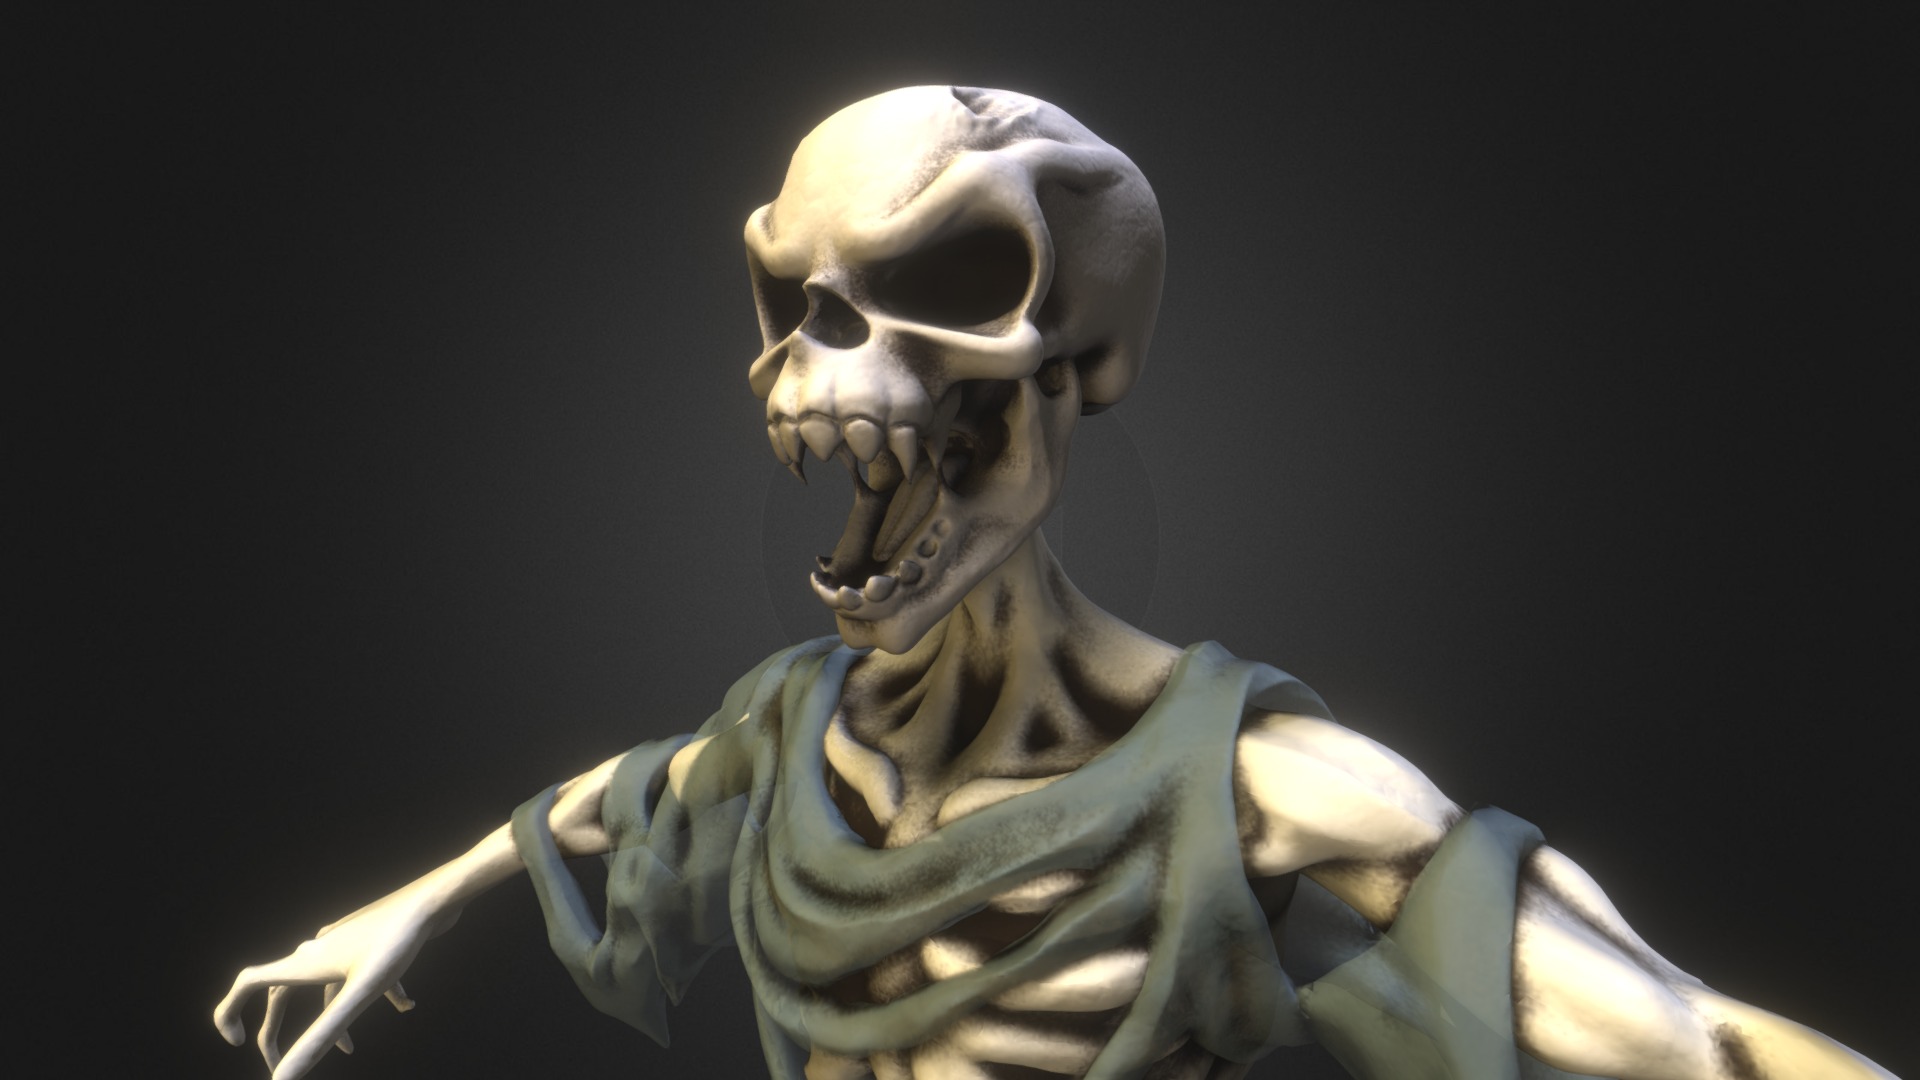 For the mobile game Dark Legends
© Spacetime Studios

(Decimated mesh not representative of low res model topology) - Ghost - 3D model by Jiovanie Velazquez (@Jiovanie) 3d model